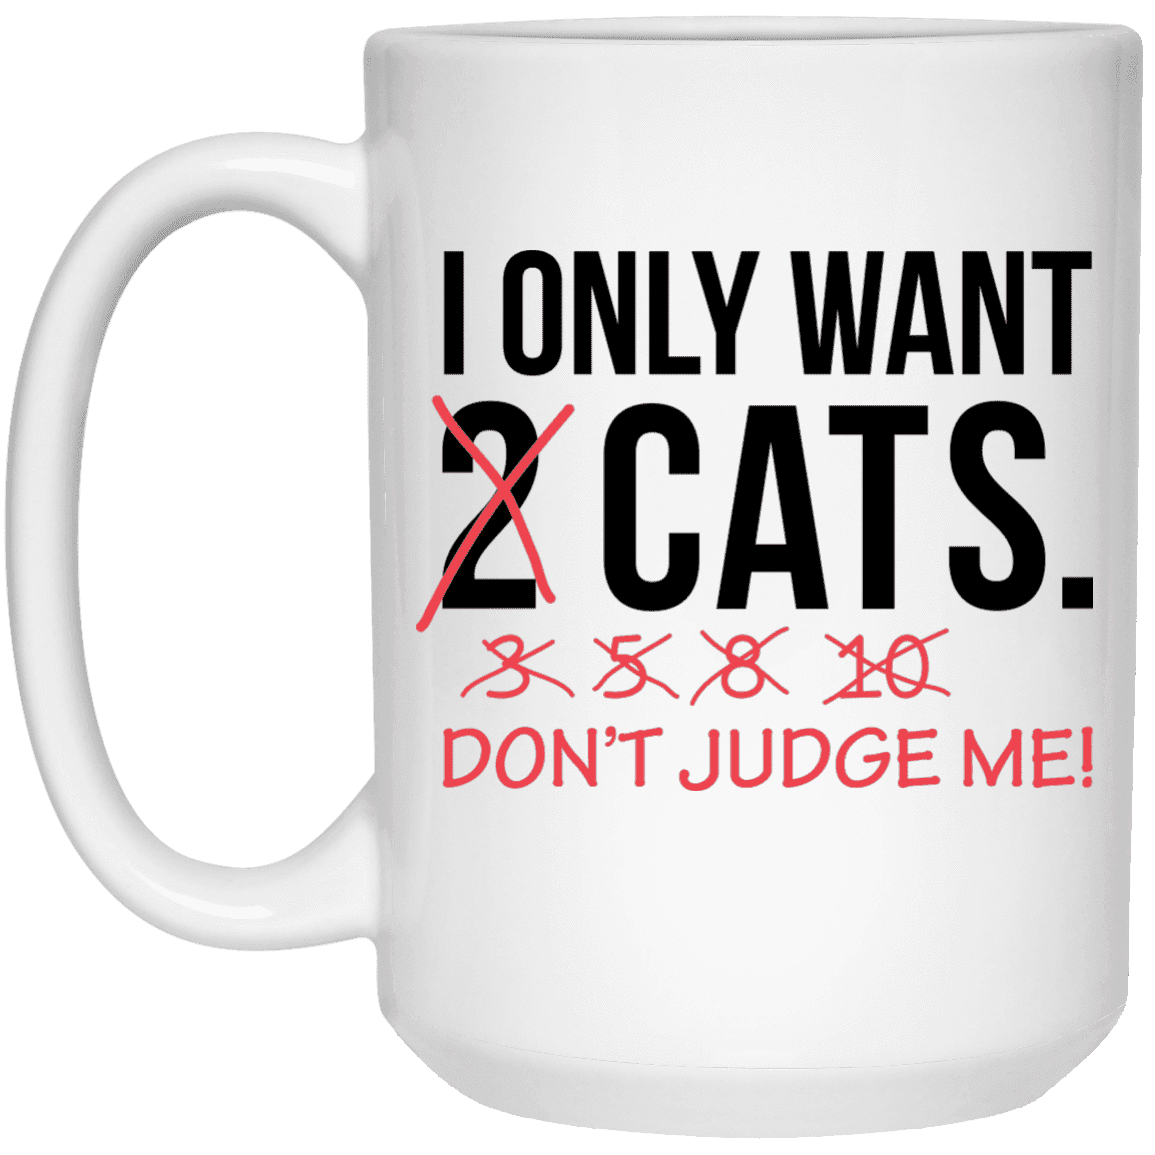 Only Want Cats - Mugs.